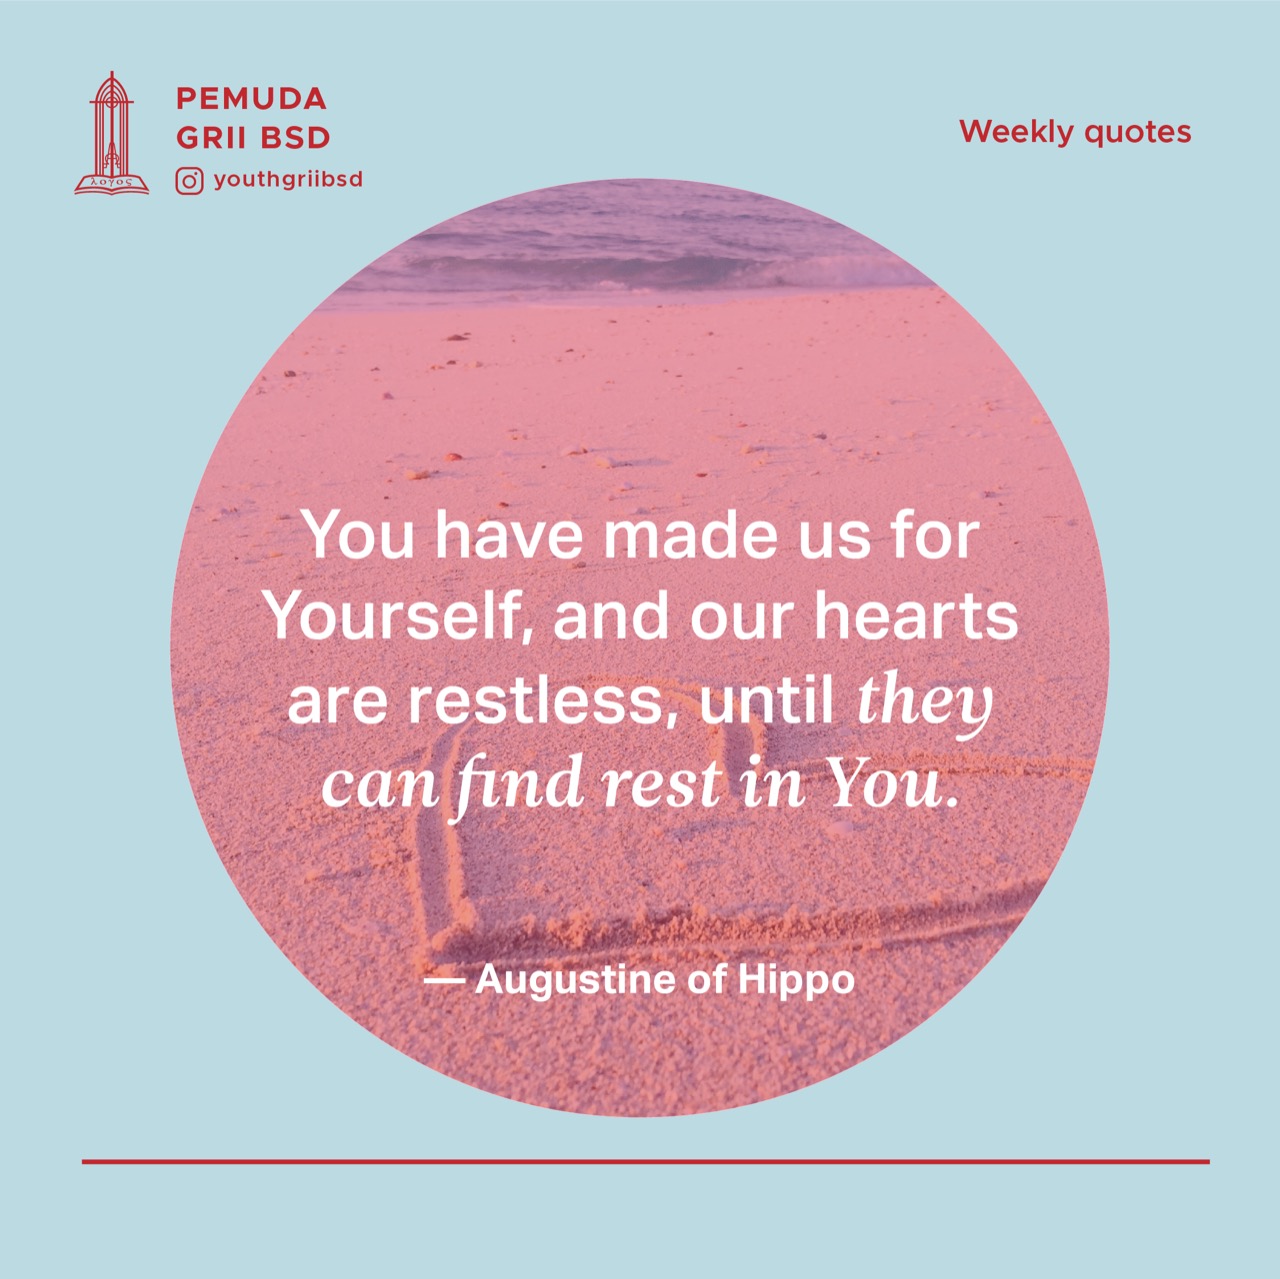 You have made us for Yourself, and our hearts are restless, until they can find rest in You.